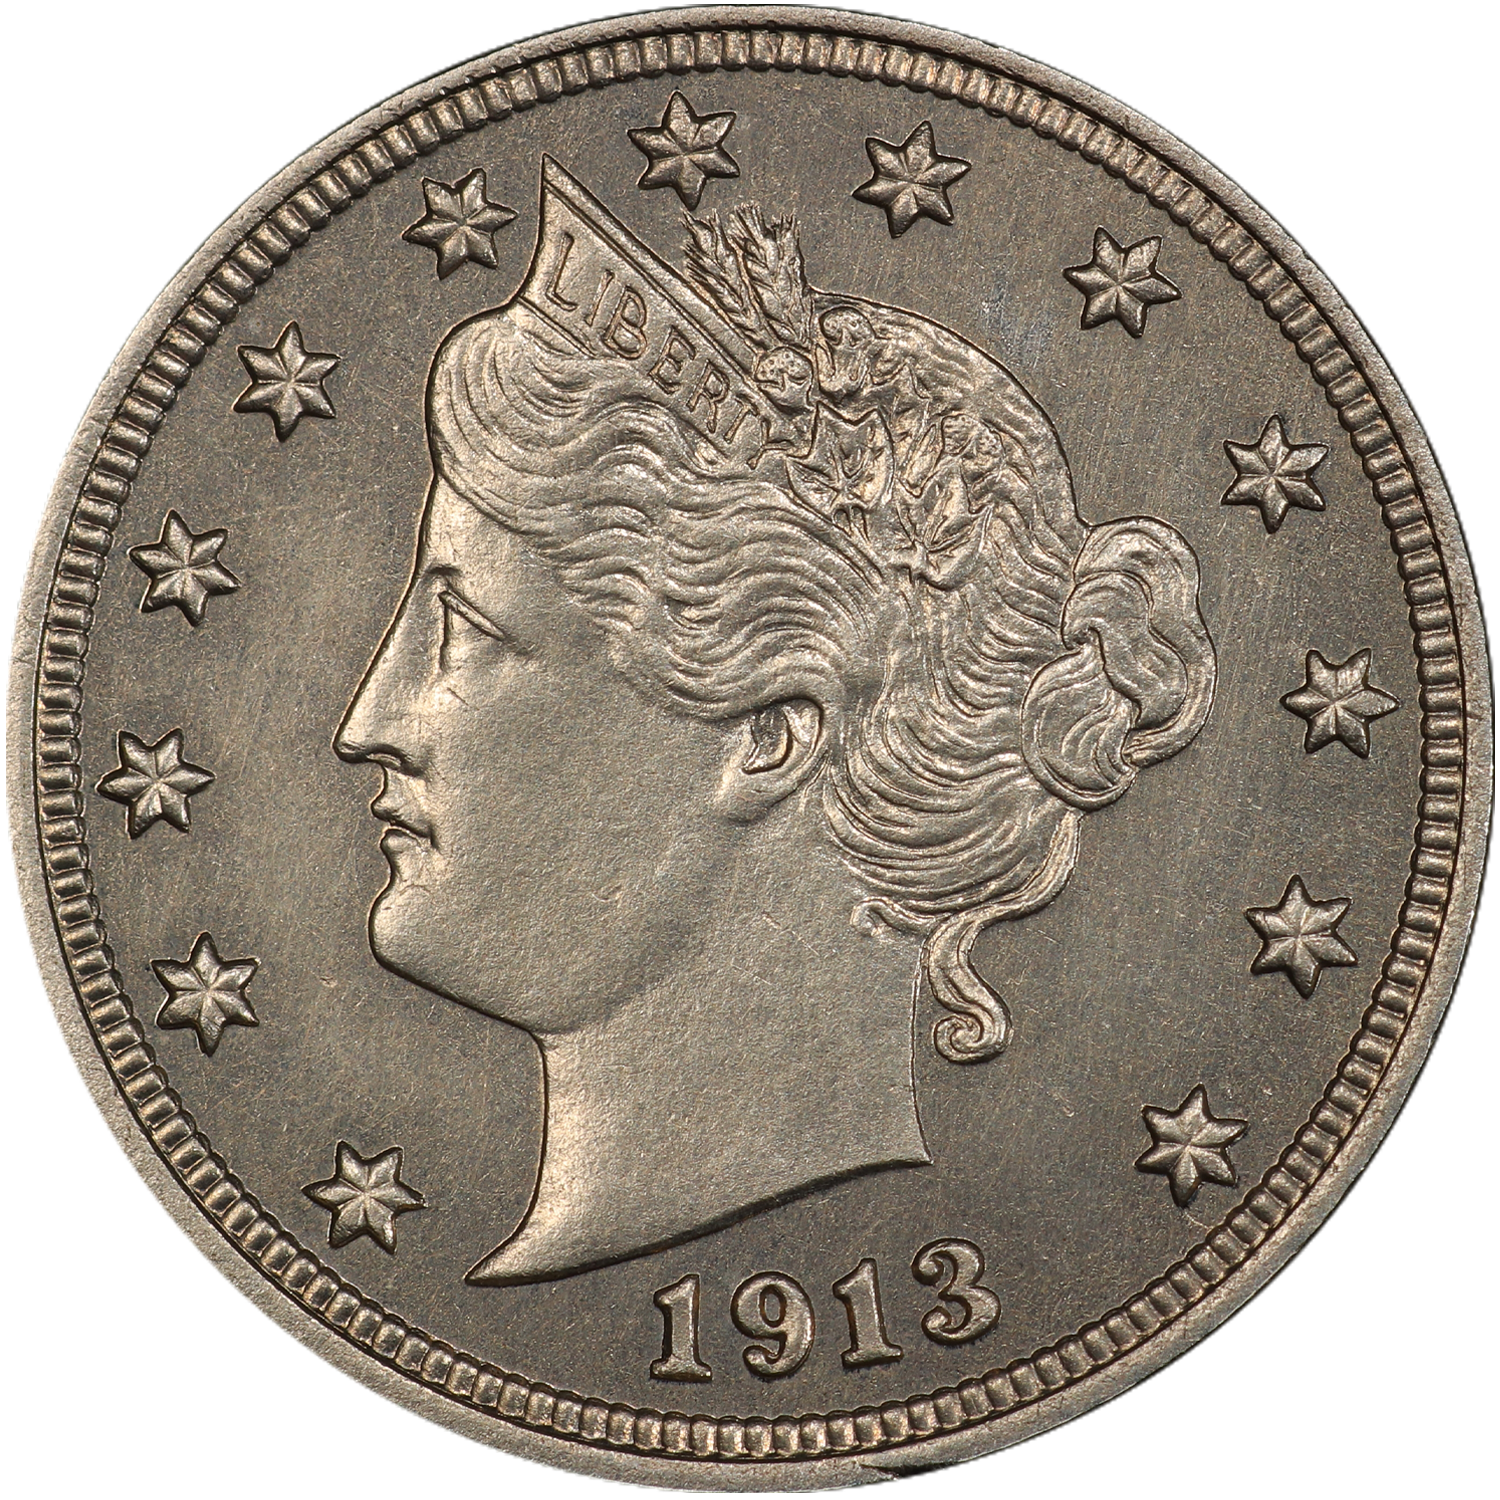 1913 liberty head nickel from the louis e eliasberg collection